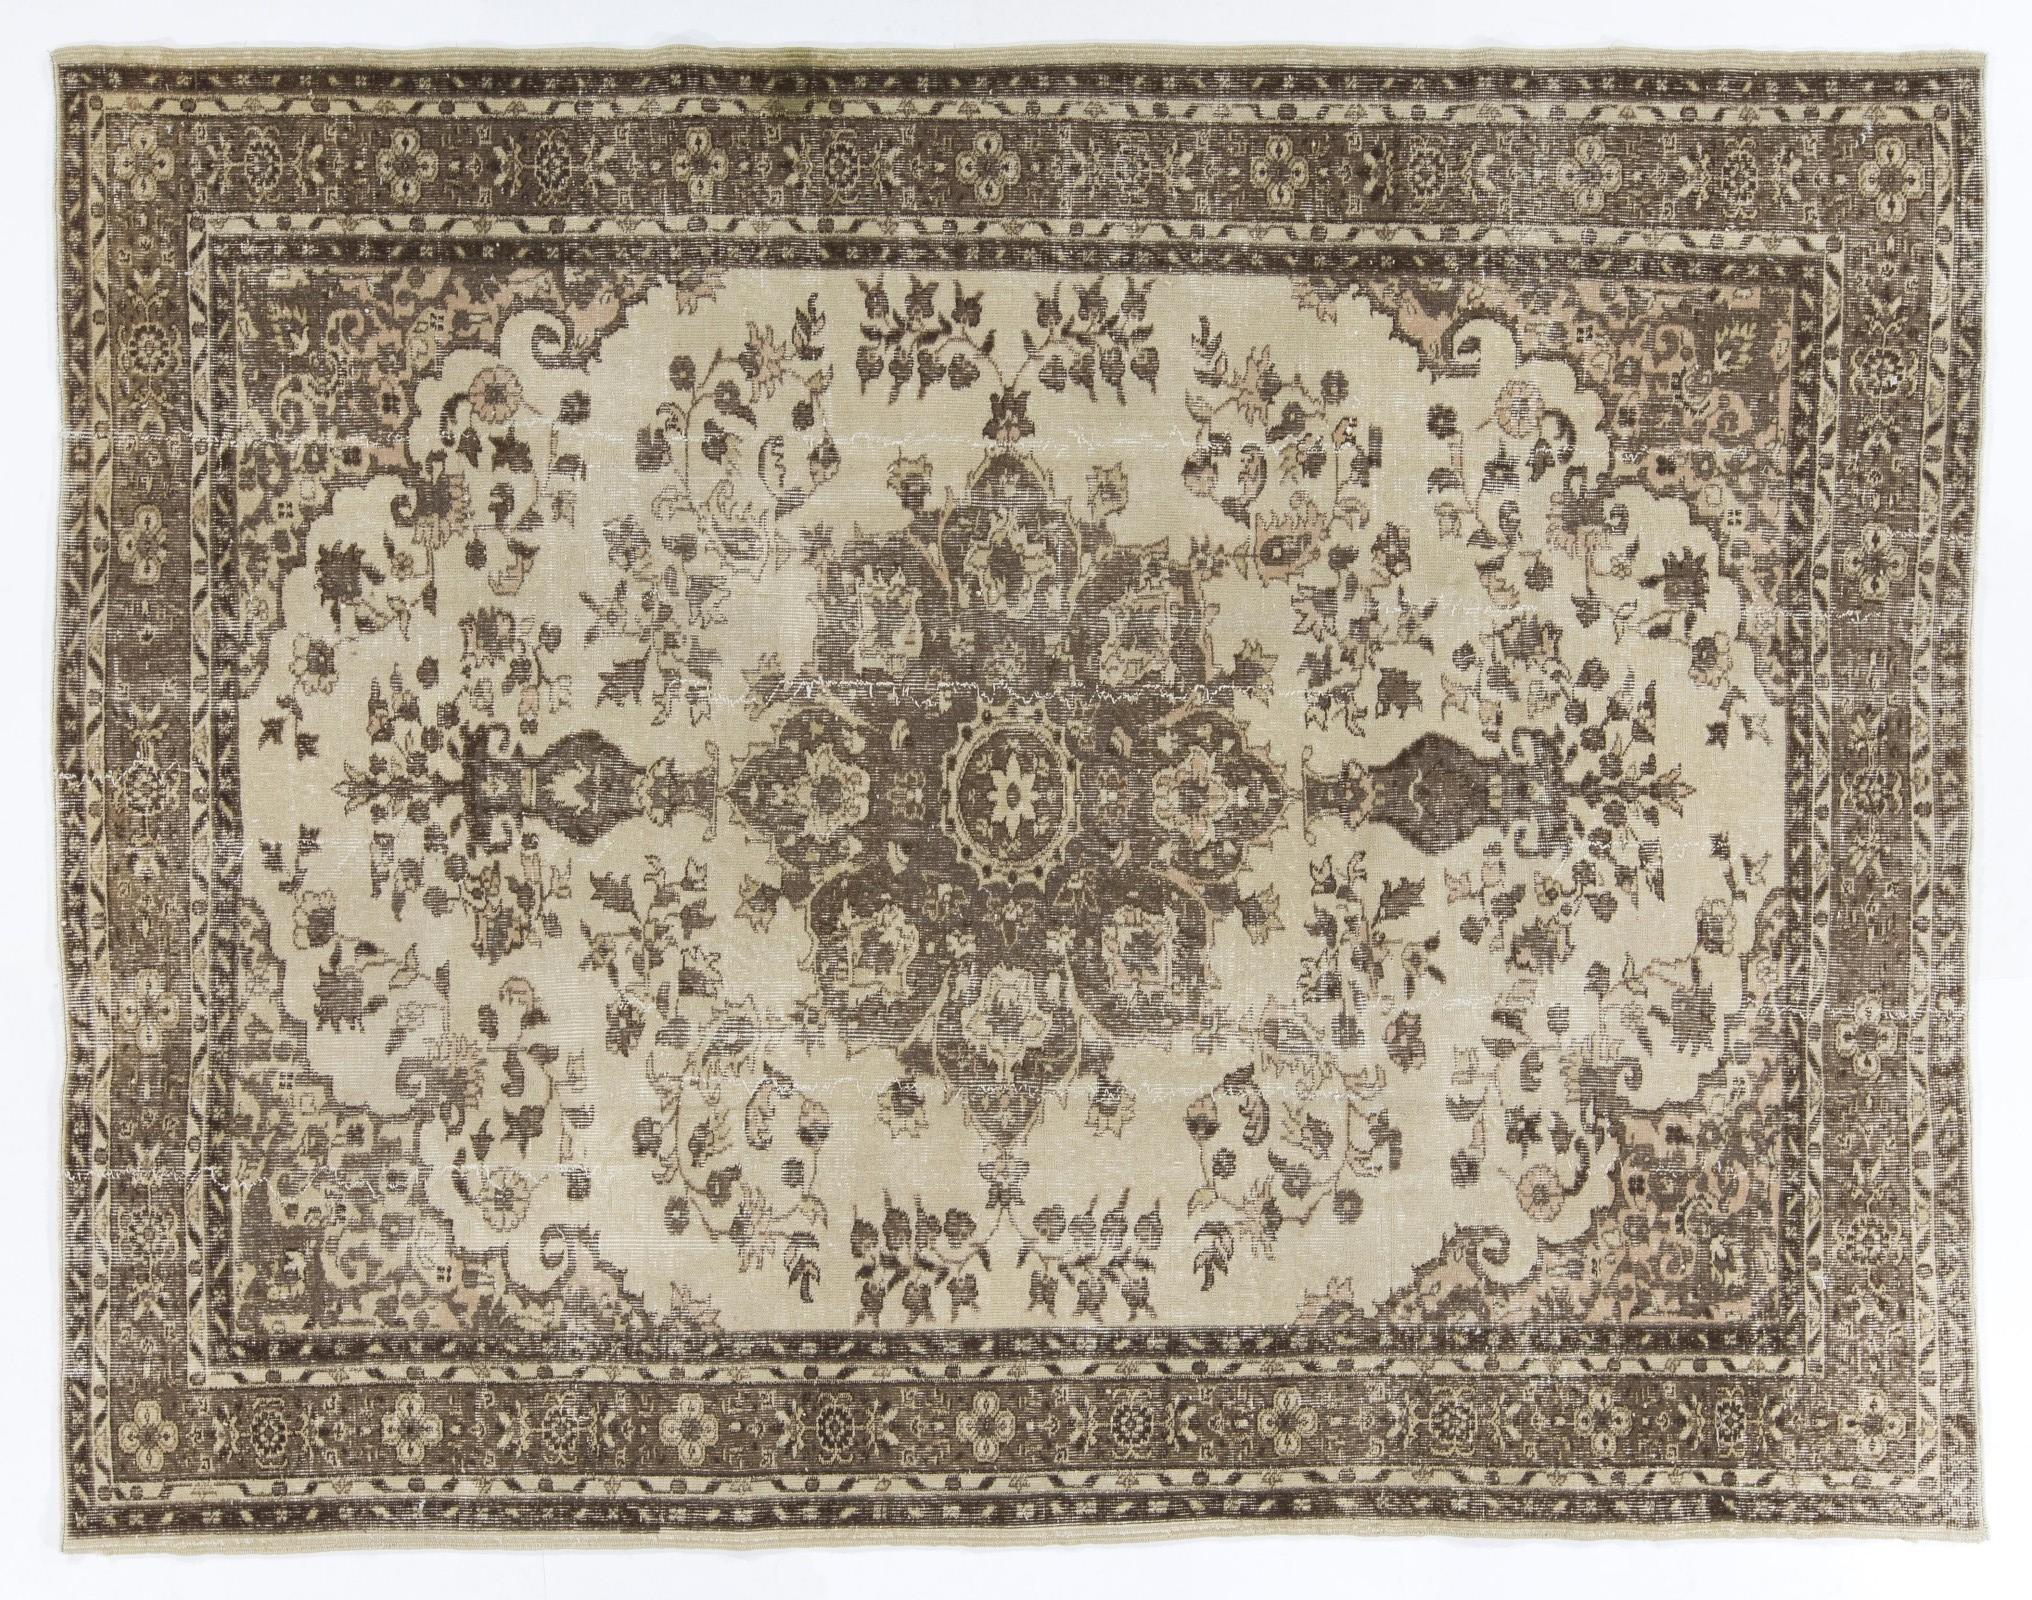 Hand-Knotted 7x9 Ft Vintage Handmade Anatolian Area Rug in Beige. Great for Office and Home For Sale